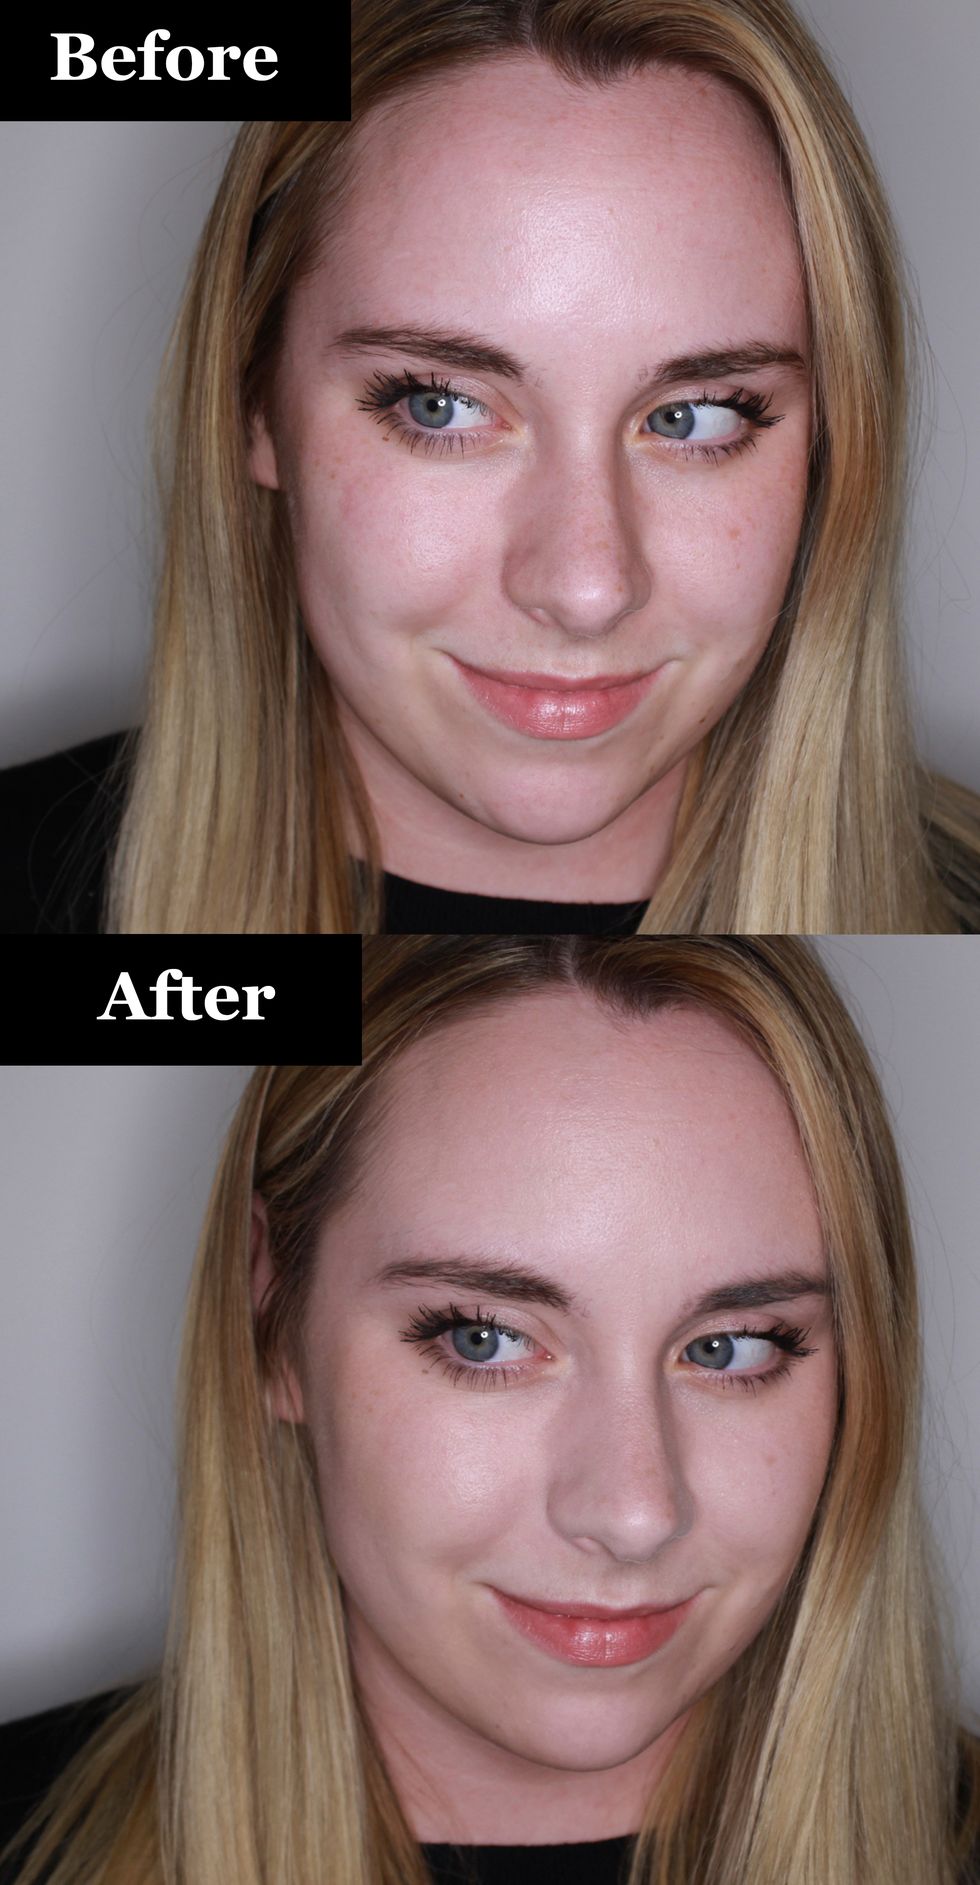 NYX total control foundation - review